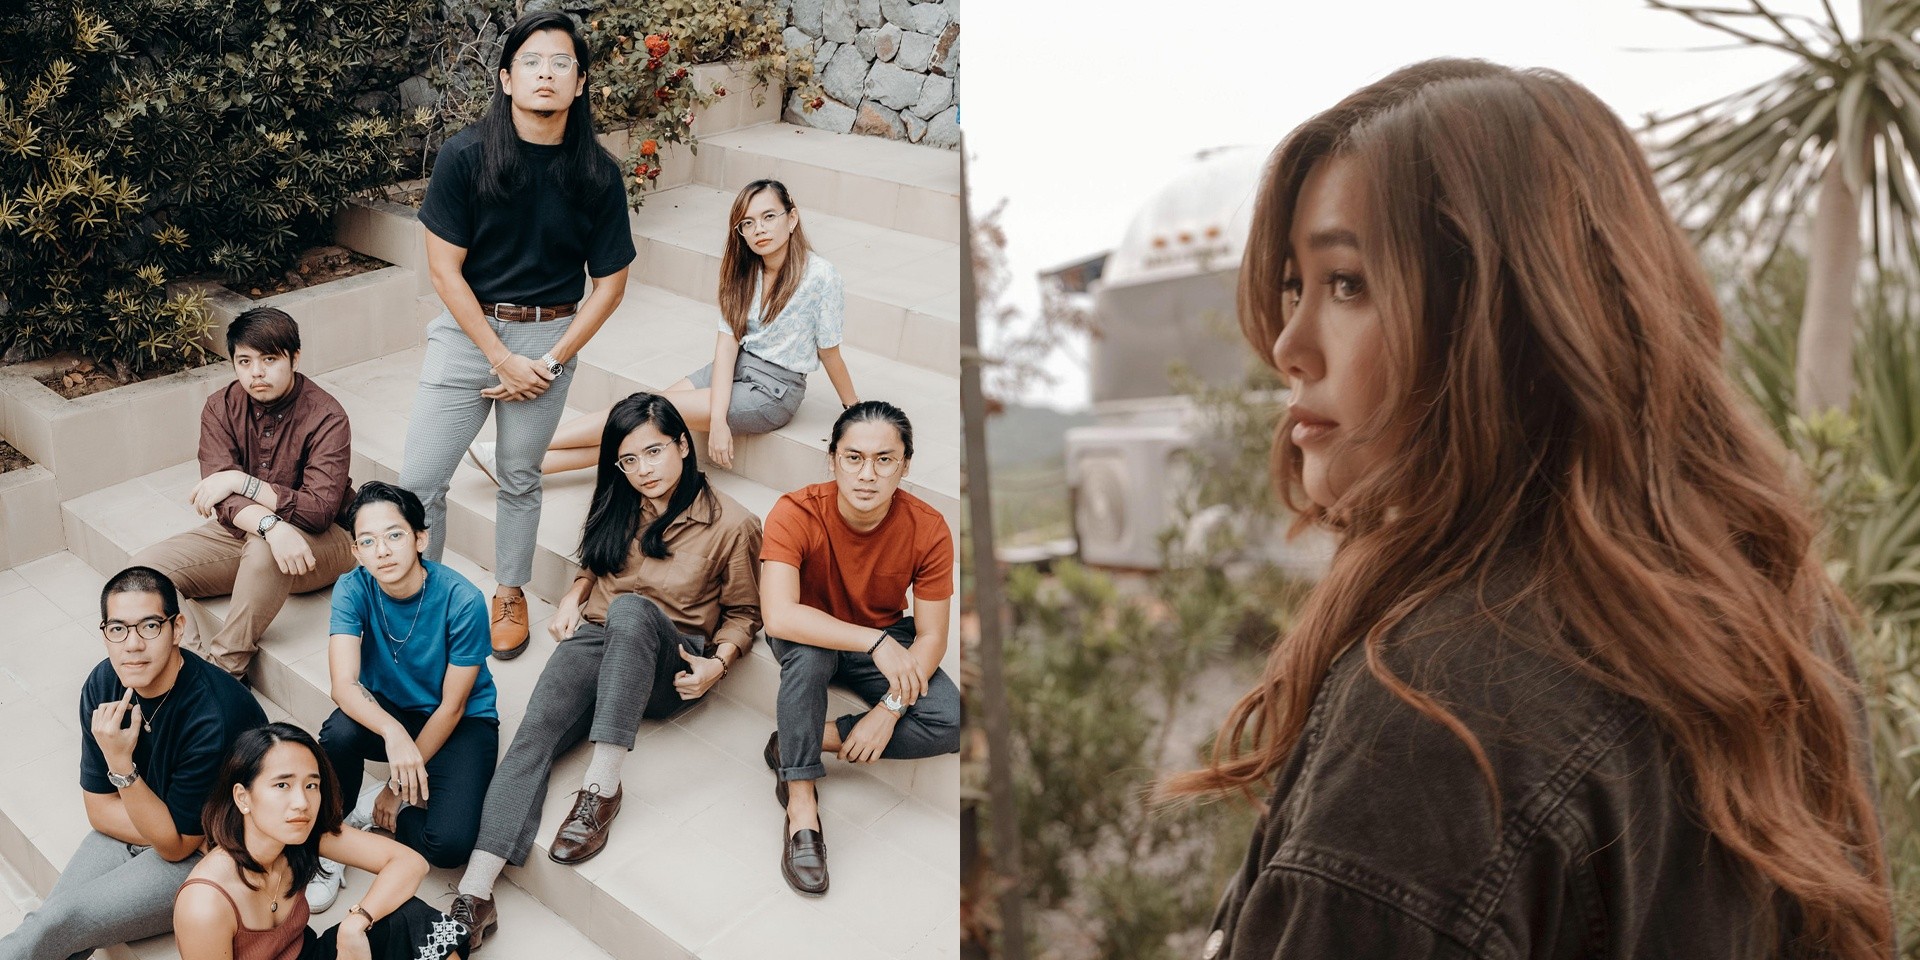 Ben&Ben and Moira Dela Torre release new collaboration, 'Pasalubong' – watch